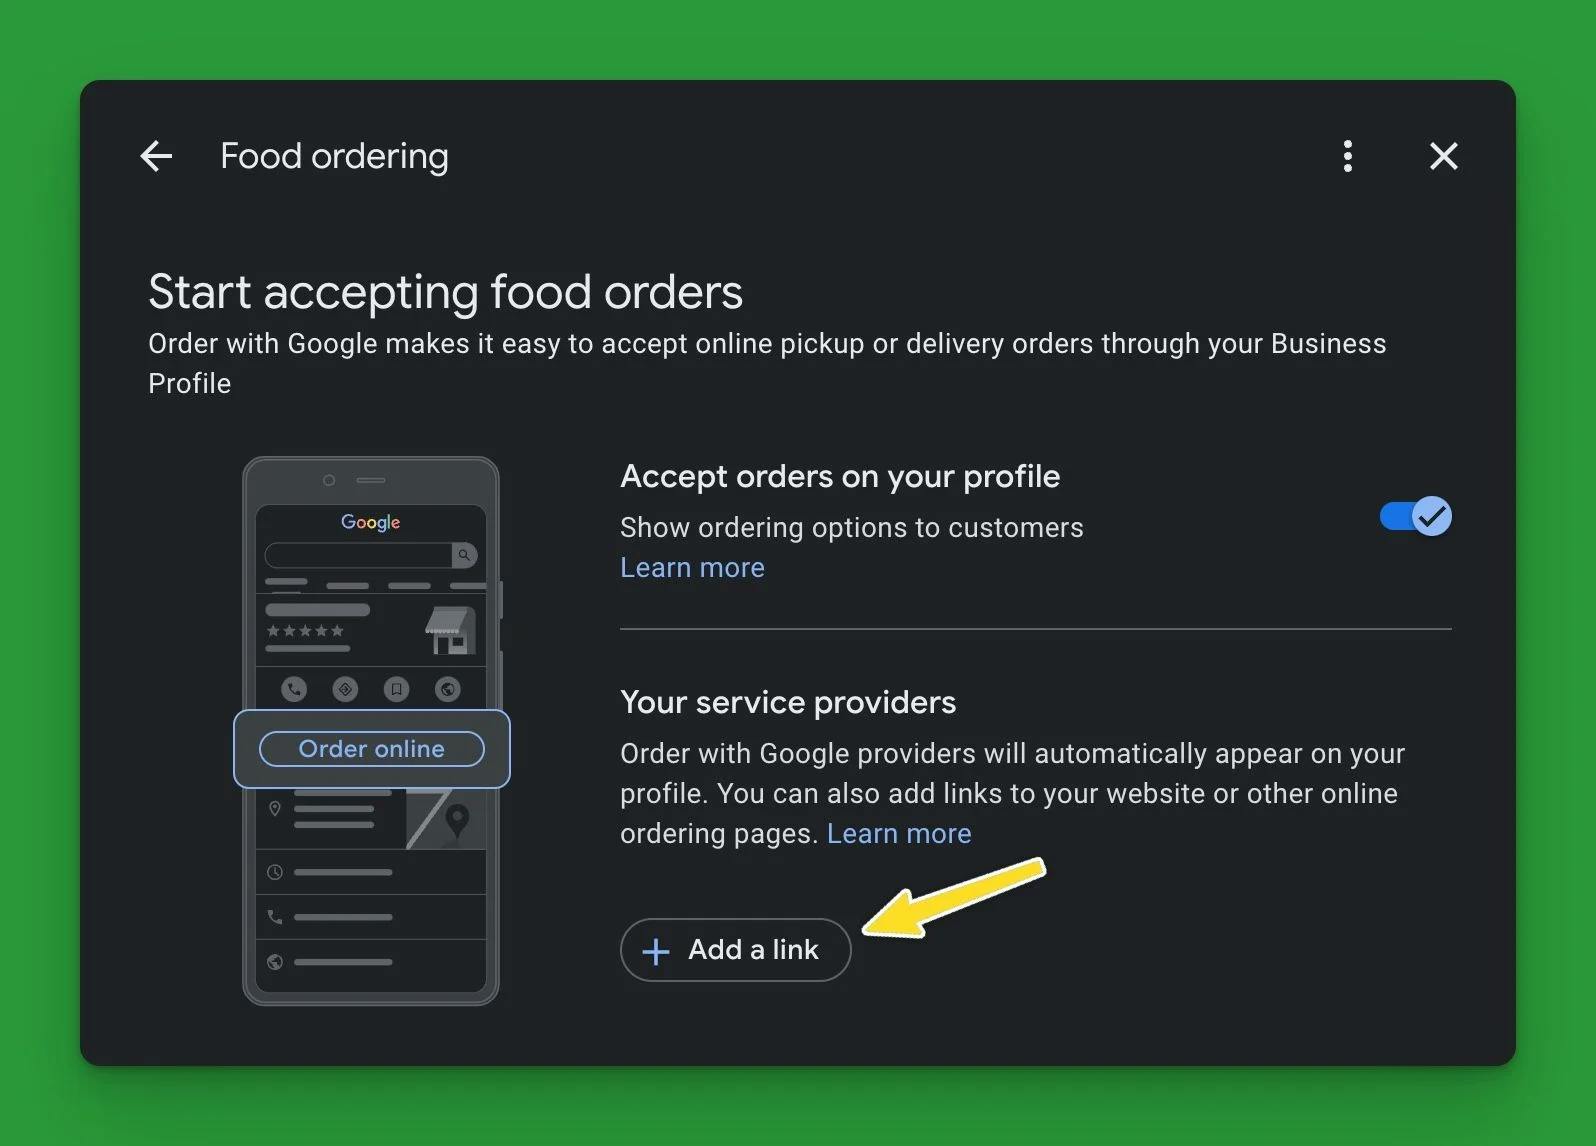 Screenshot of the google business profile food ordering setting with a yellow arrow pointing to Add a link